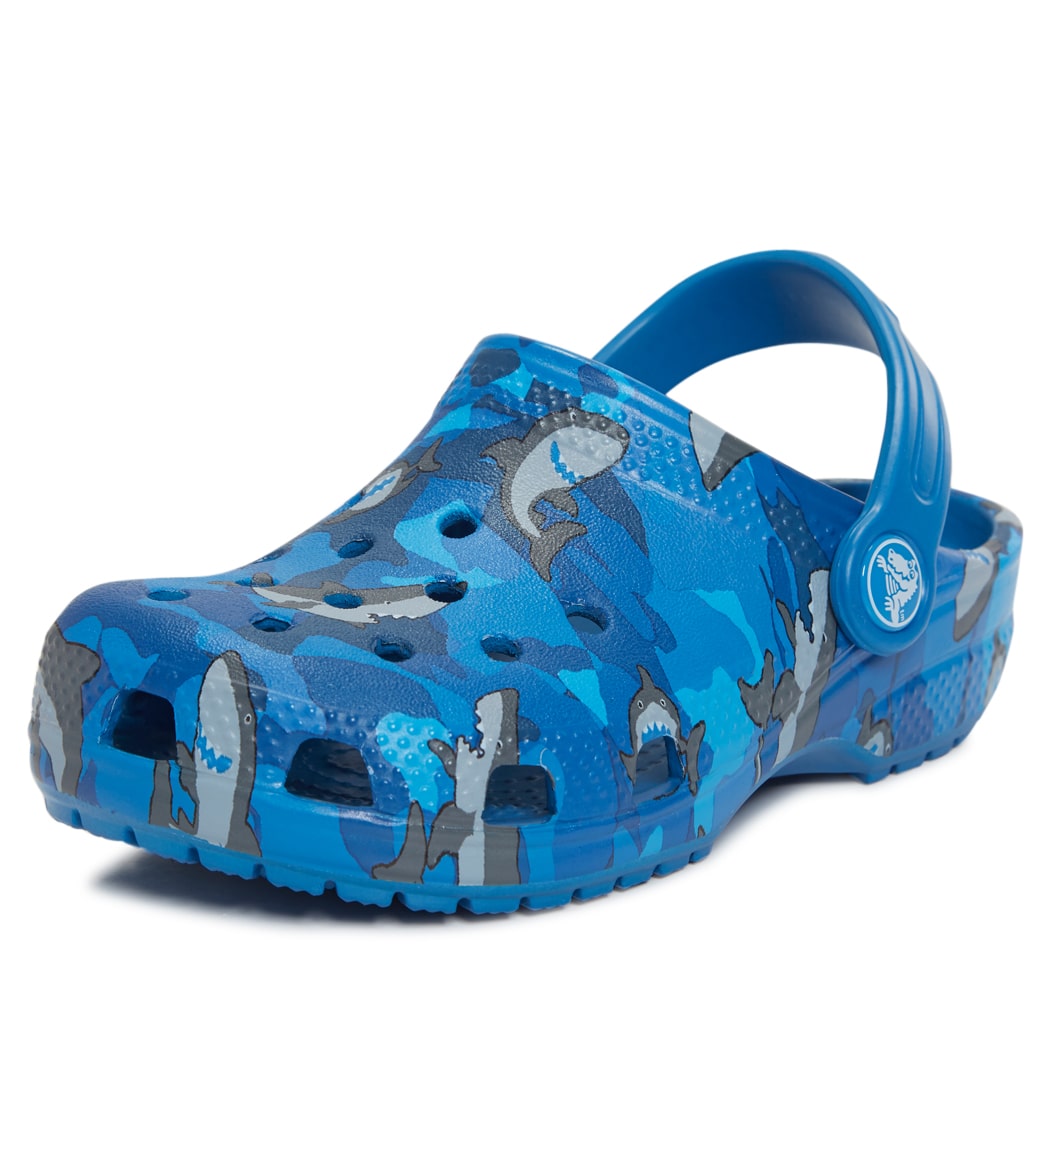 shark crocs for toddlers